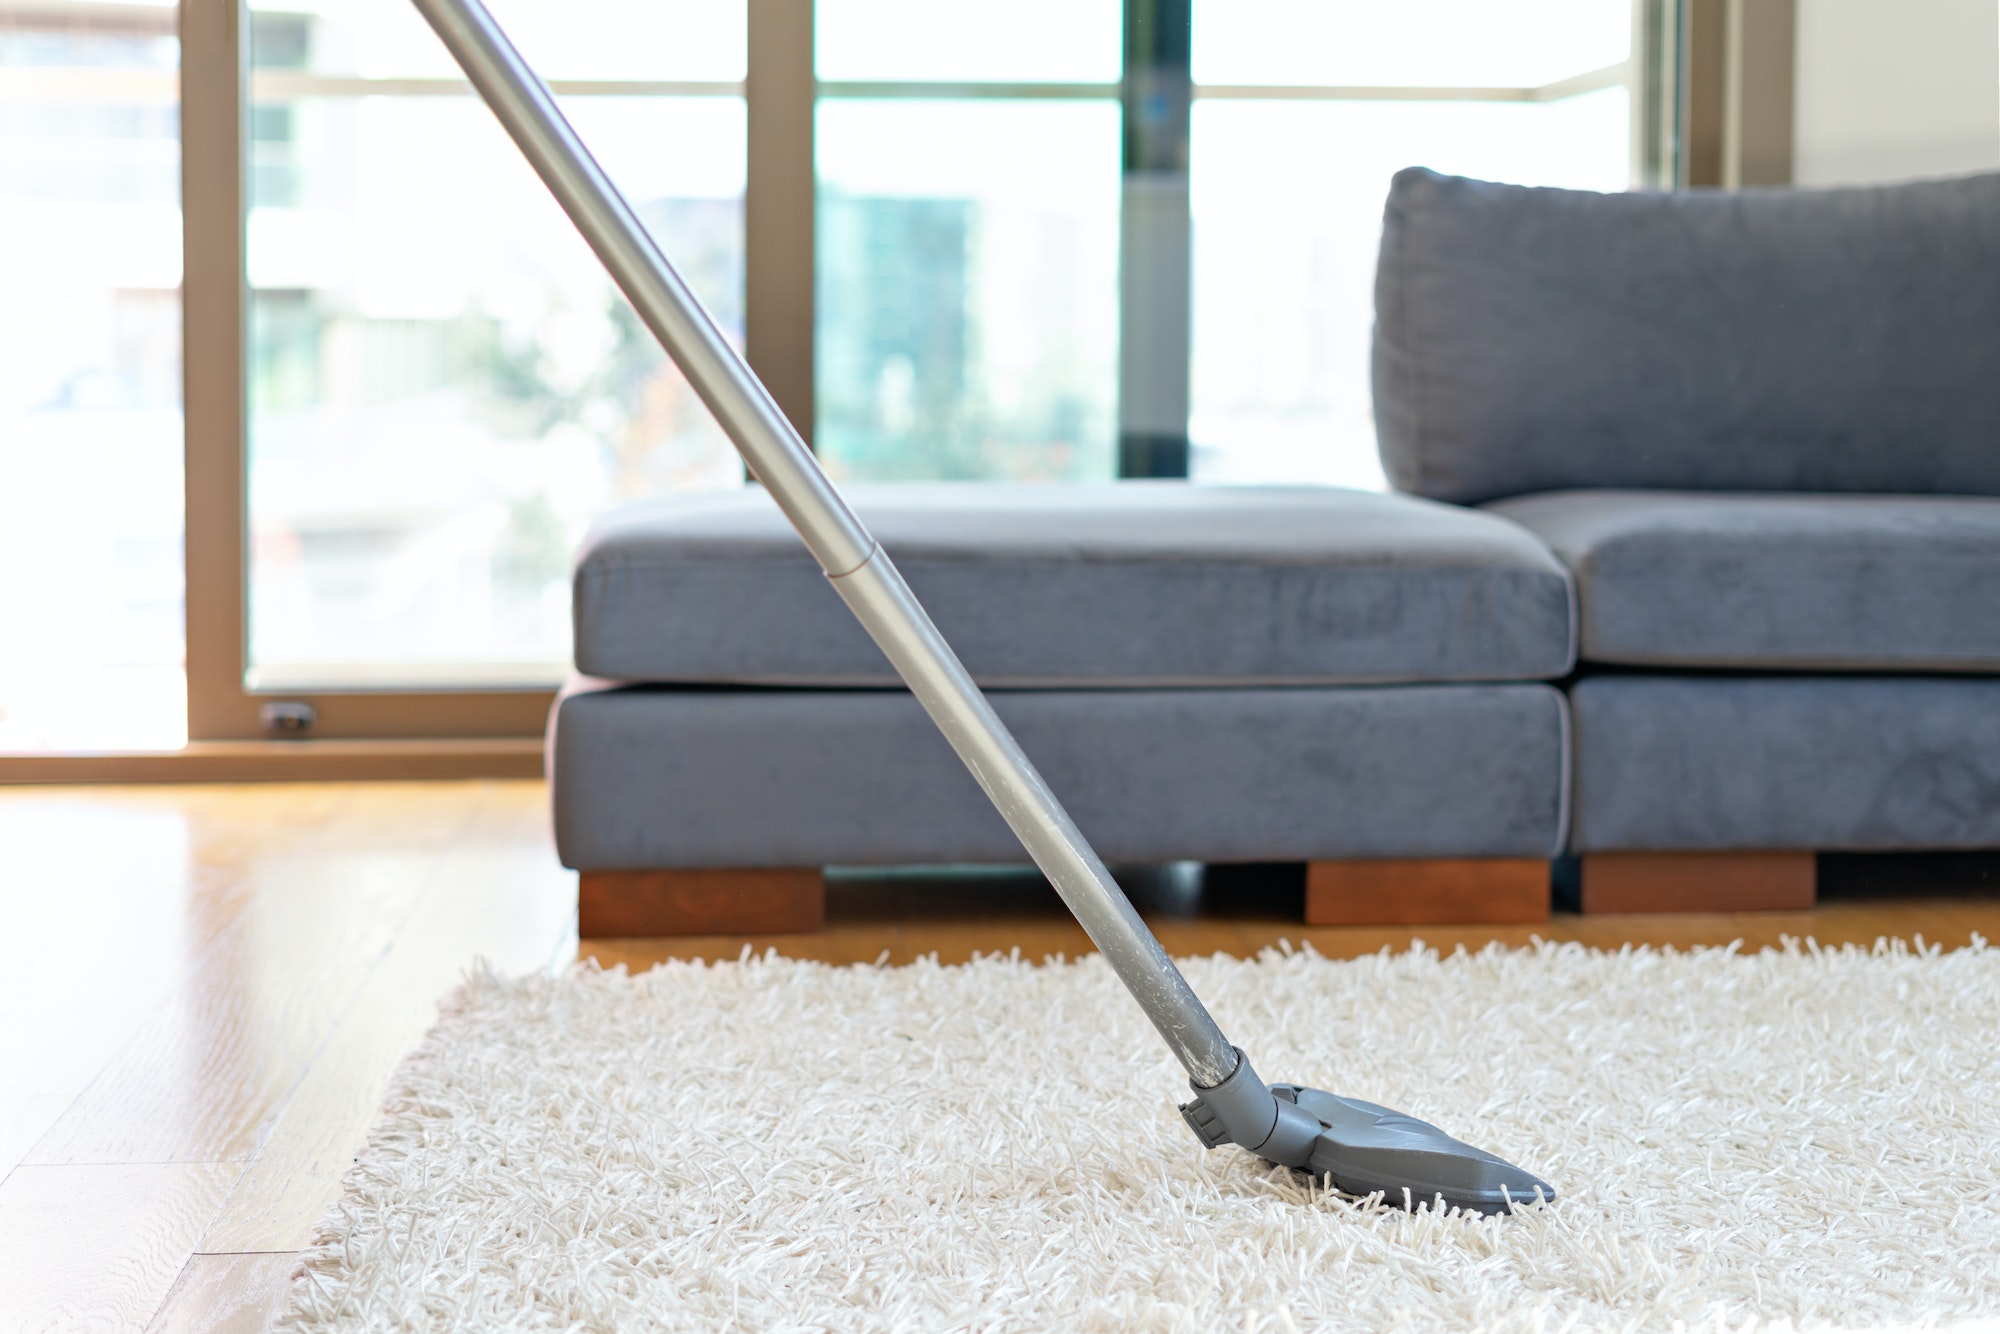 Cleaning floor and carpet with vacuum cleaner.